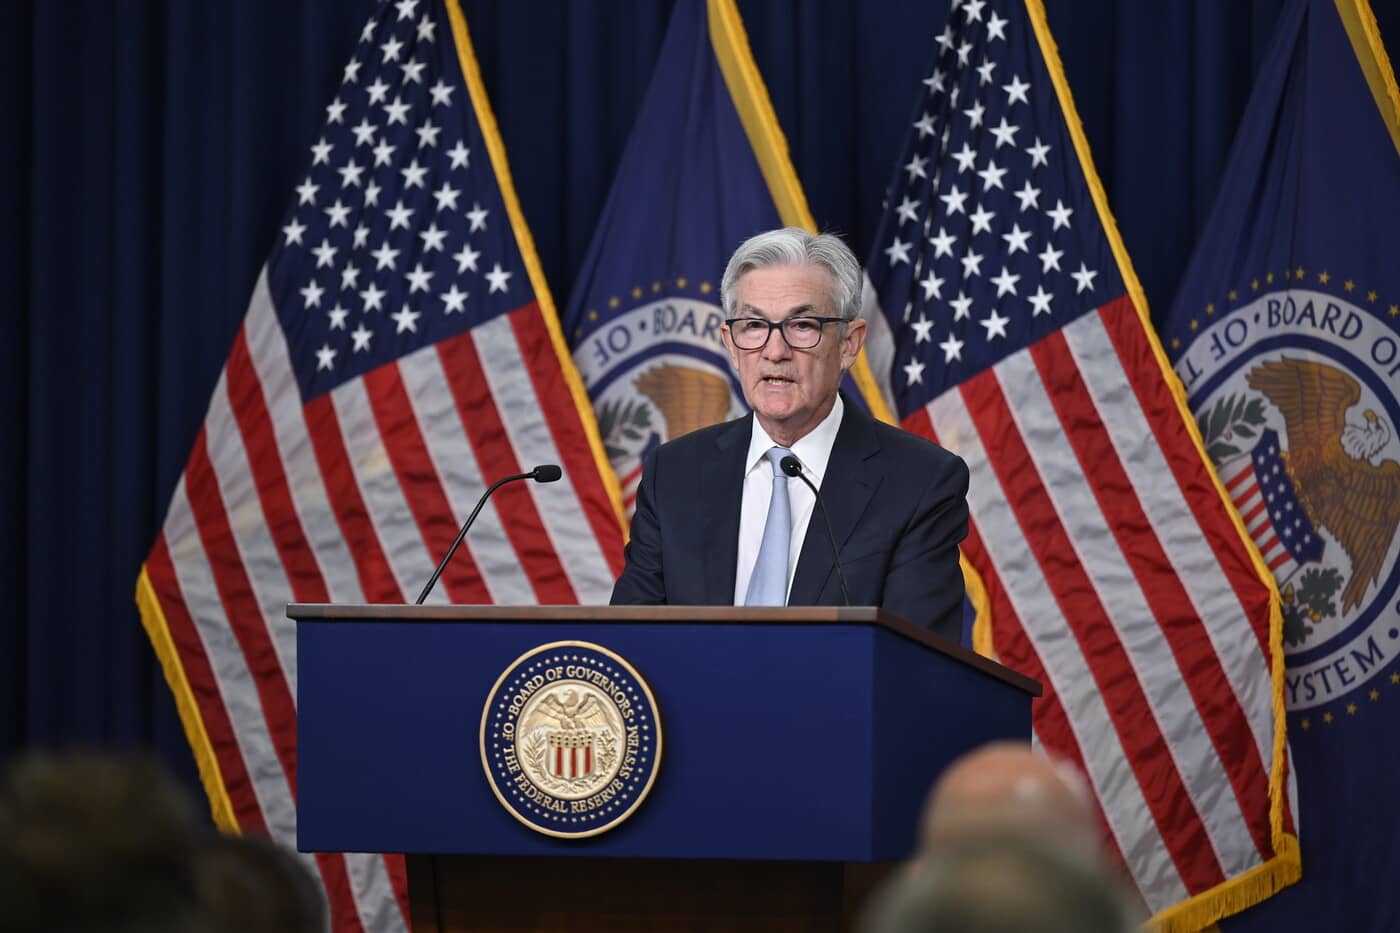 Fed Chair Says Crypto Has “Staying Power” As An Asset